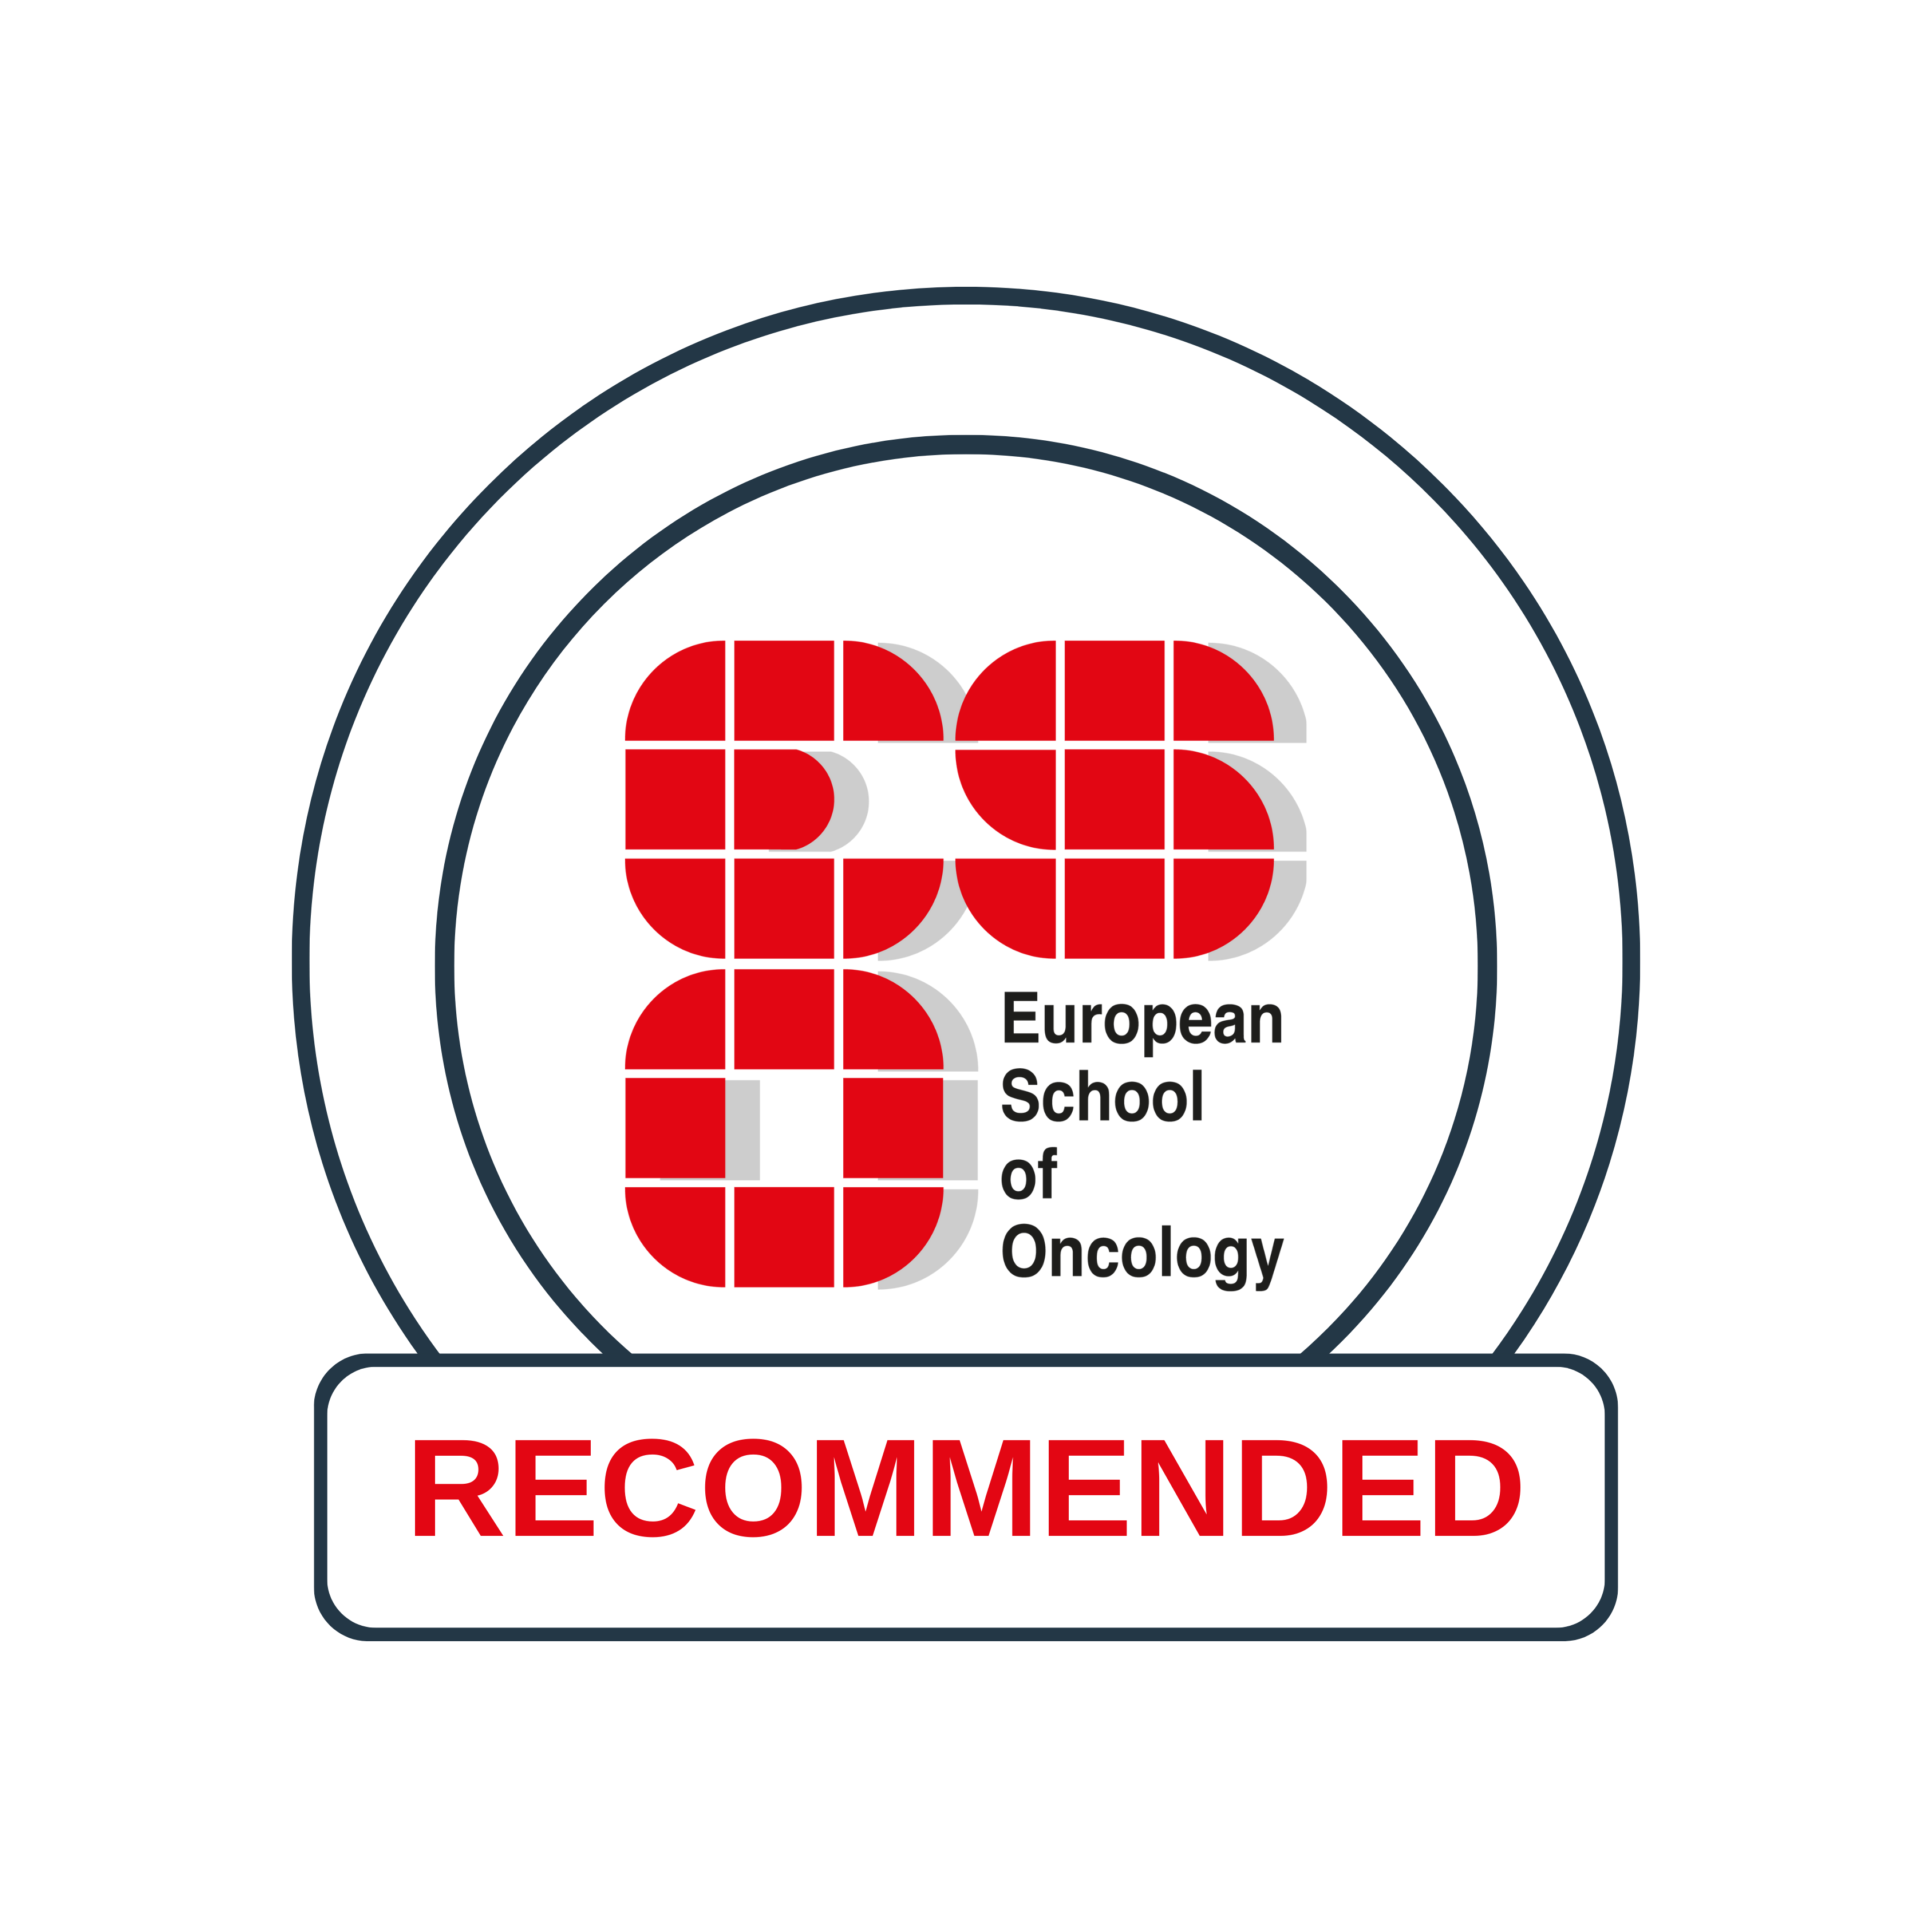 Euroepan School of Oncology Recommended Label